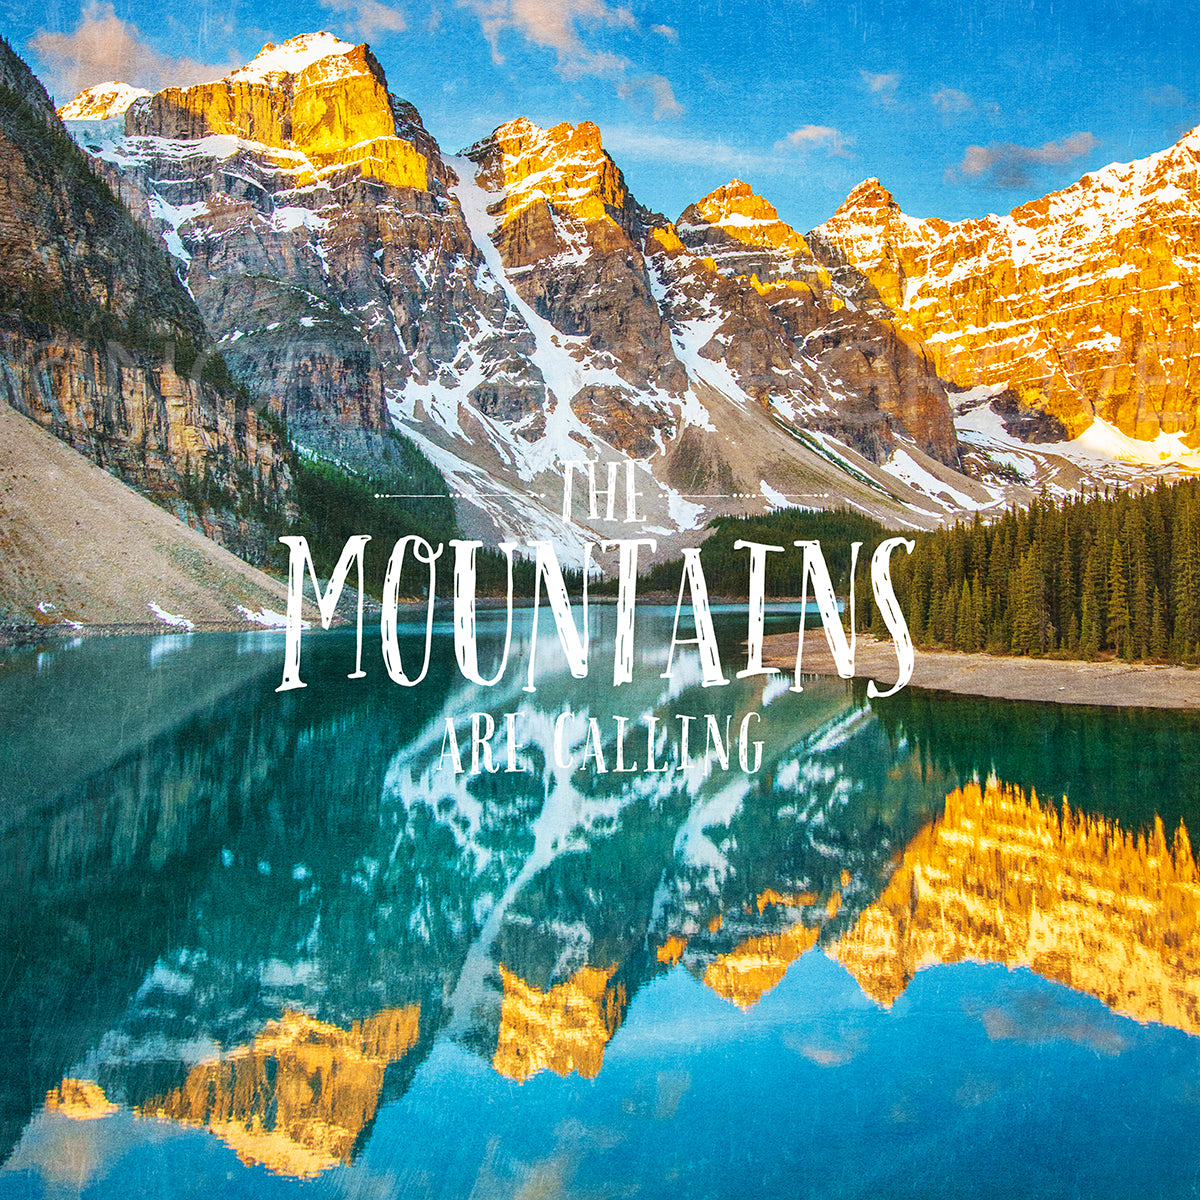 SALE 8x8" Metallic Paper Print <br>The Mountains Are Calling Moraine Lake<br>